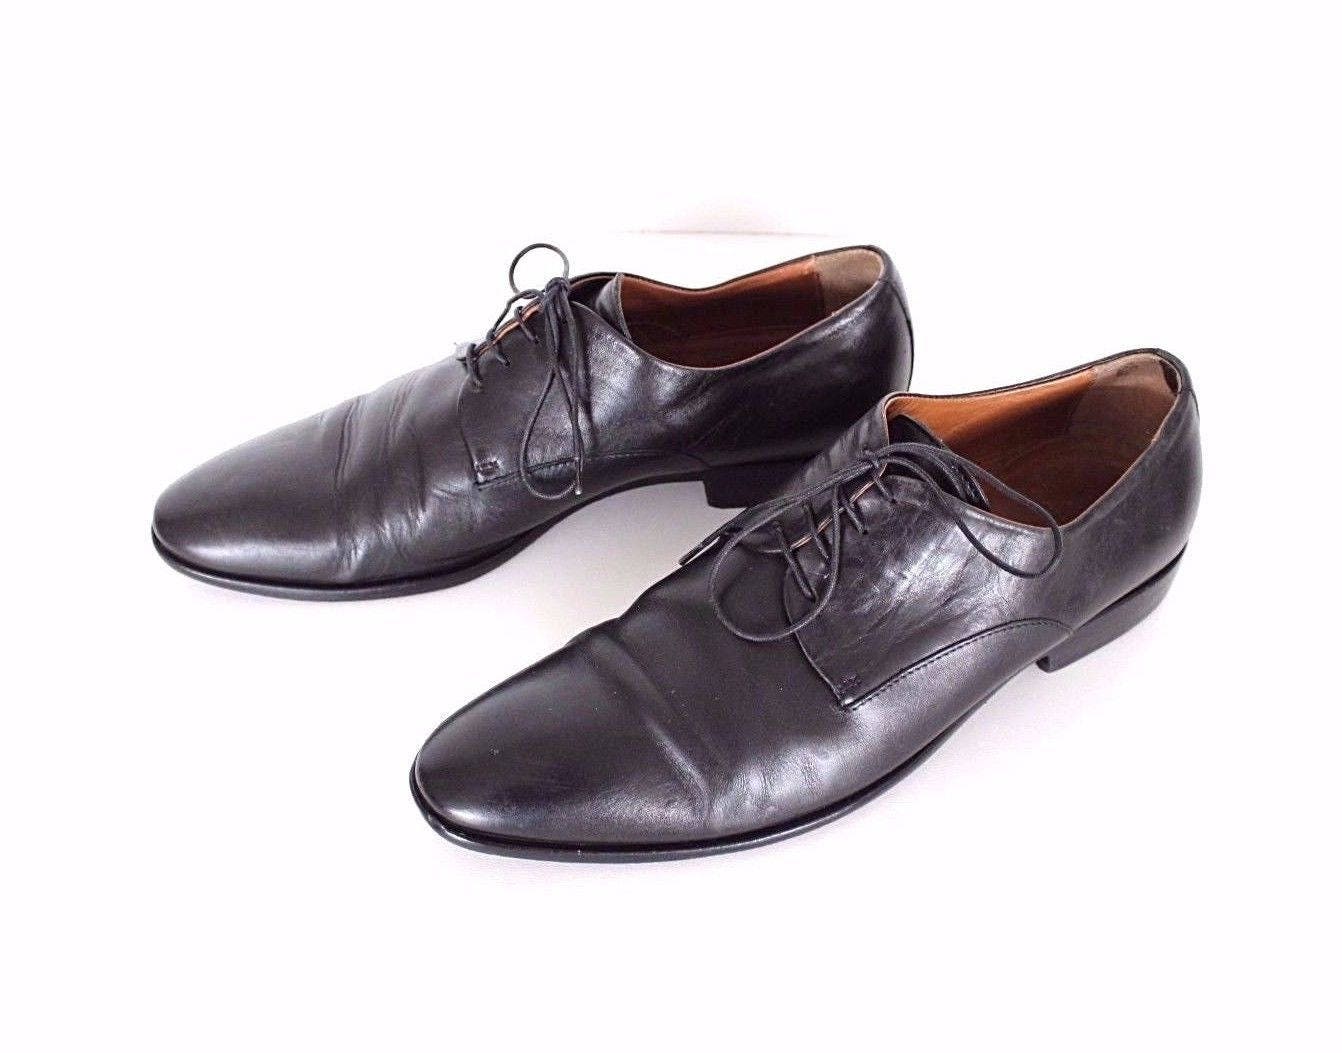 Navyboot Men's Vintage Lace Up Shoes